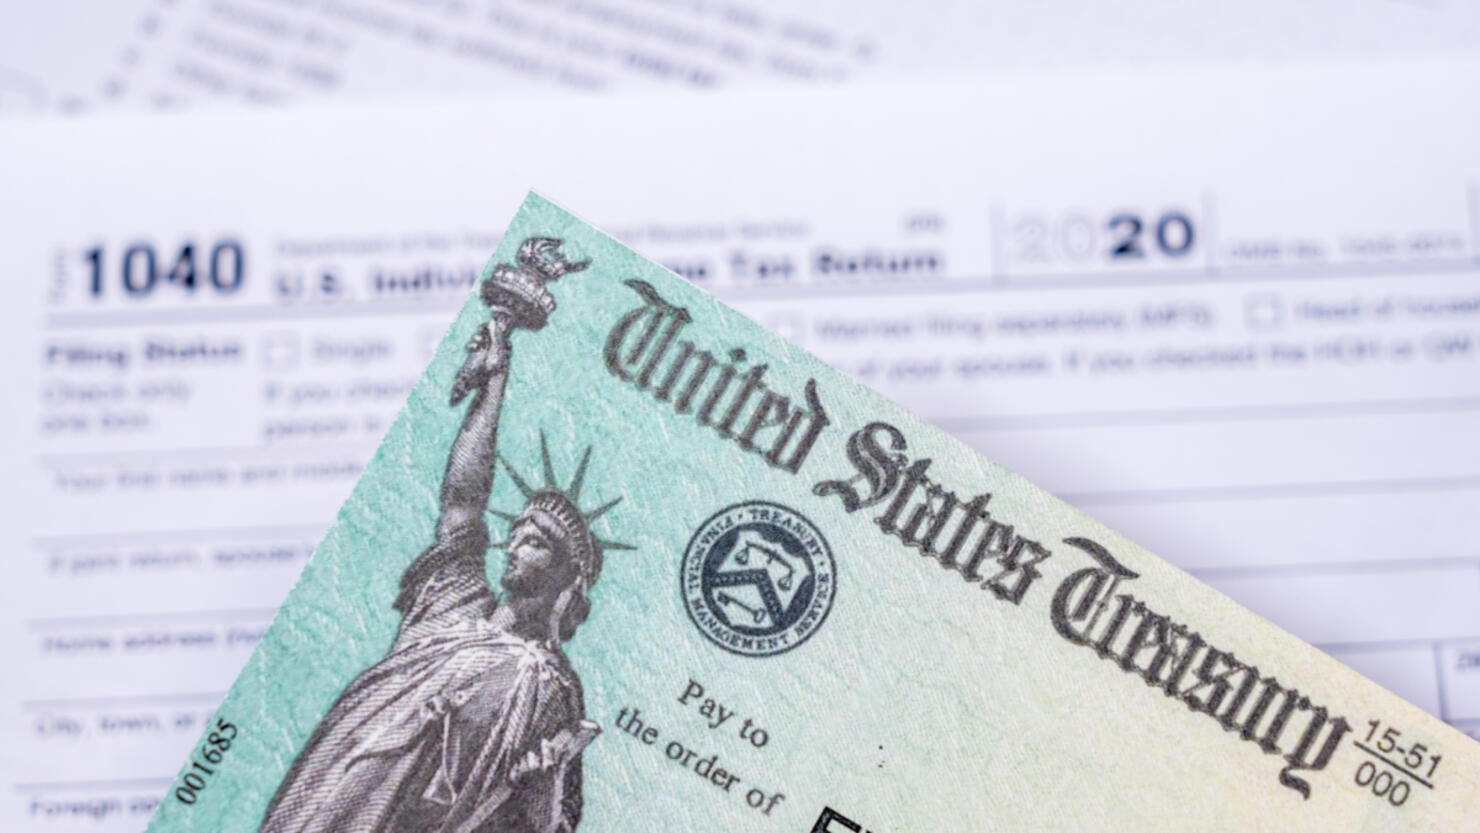 south-carolina-rebate-checks-could-be-taxable-by-the-irs-iheart